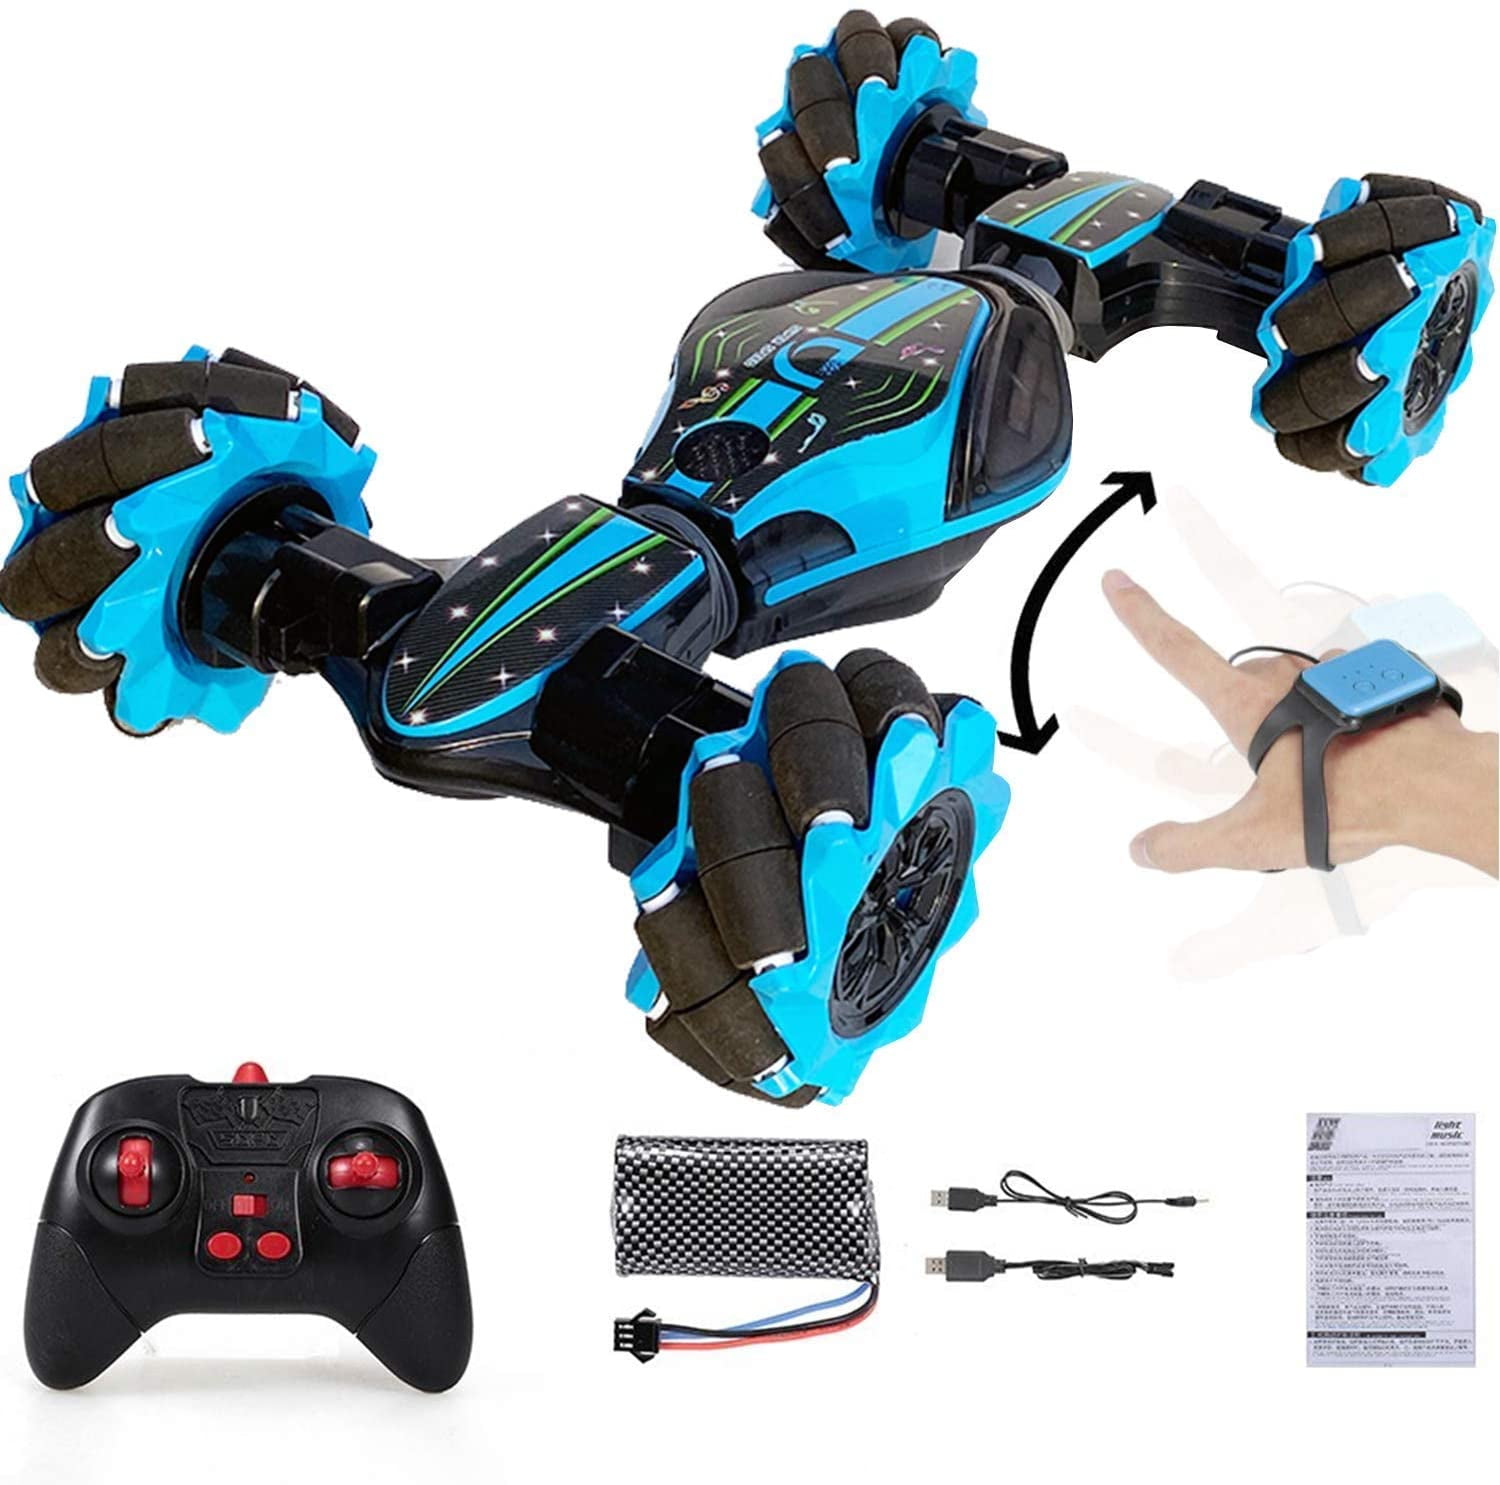 40 Min Standby Suitable for Any Terrain Blue 2.4G Gesture Controlled Double-Sided Remote-Control Car Toy for Kids Sports Mode Four-Wheel Drive Boxgear Gesture Sensing RC Stunt Car with Off-Road 